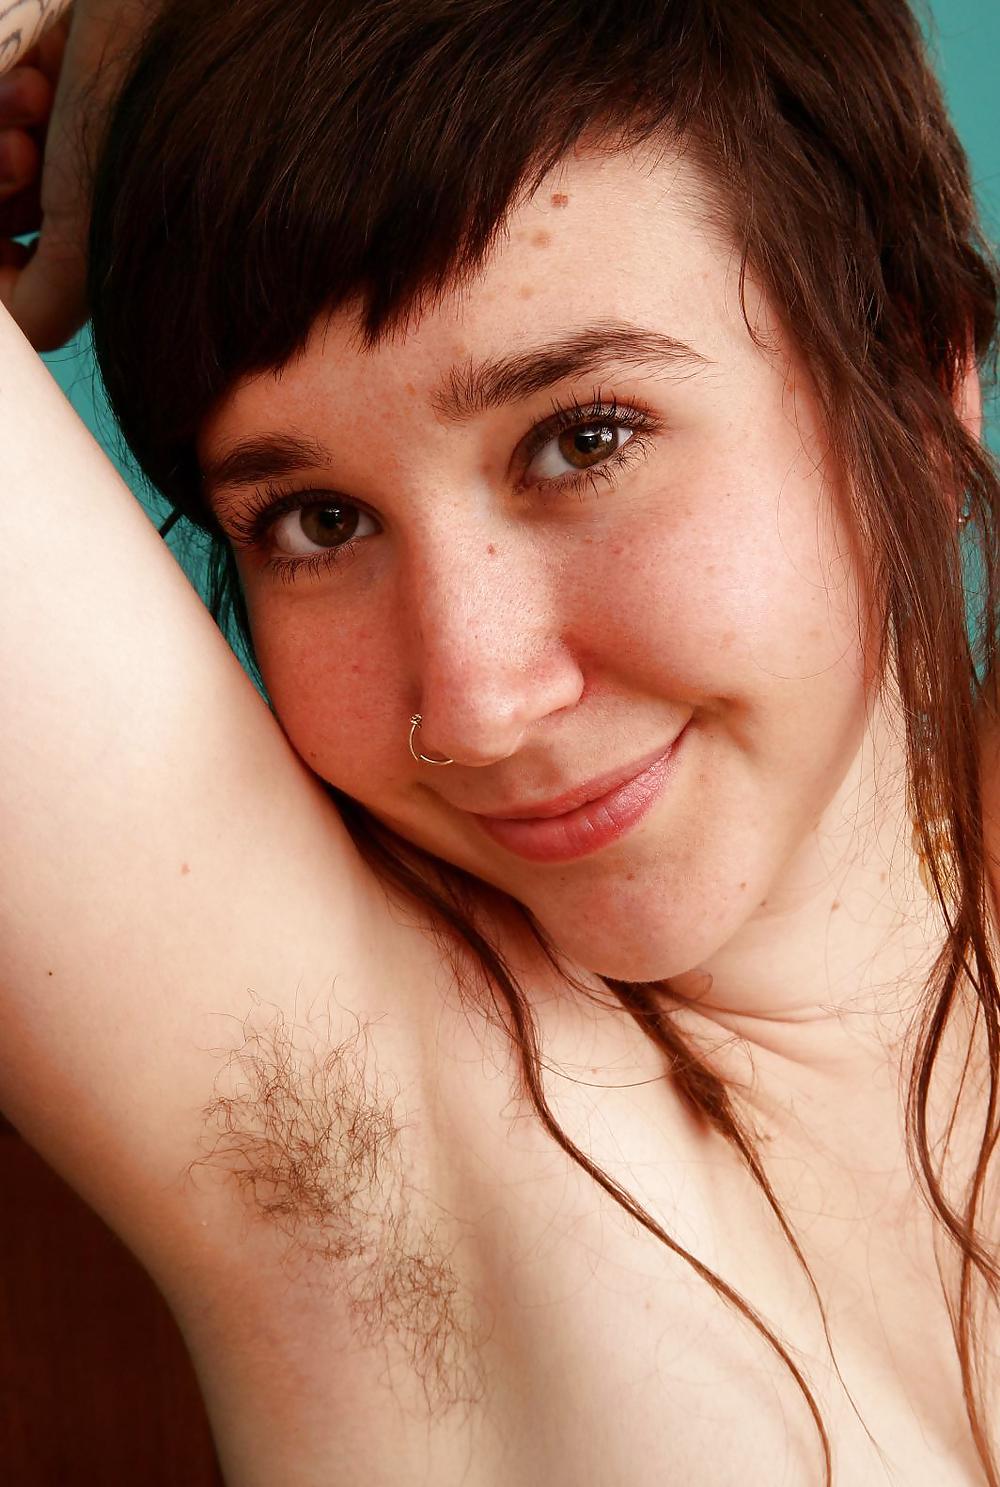 Miscellaneous girls showing hairy, unshaven armpits 1 #36224706